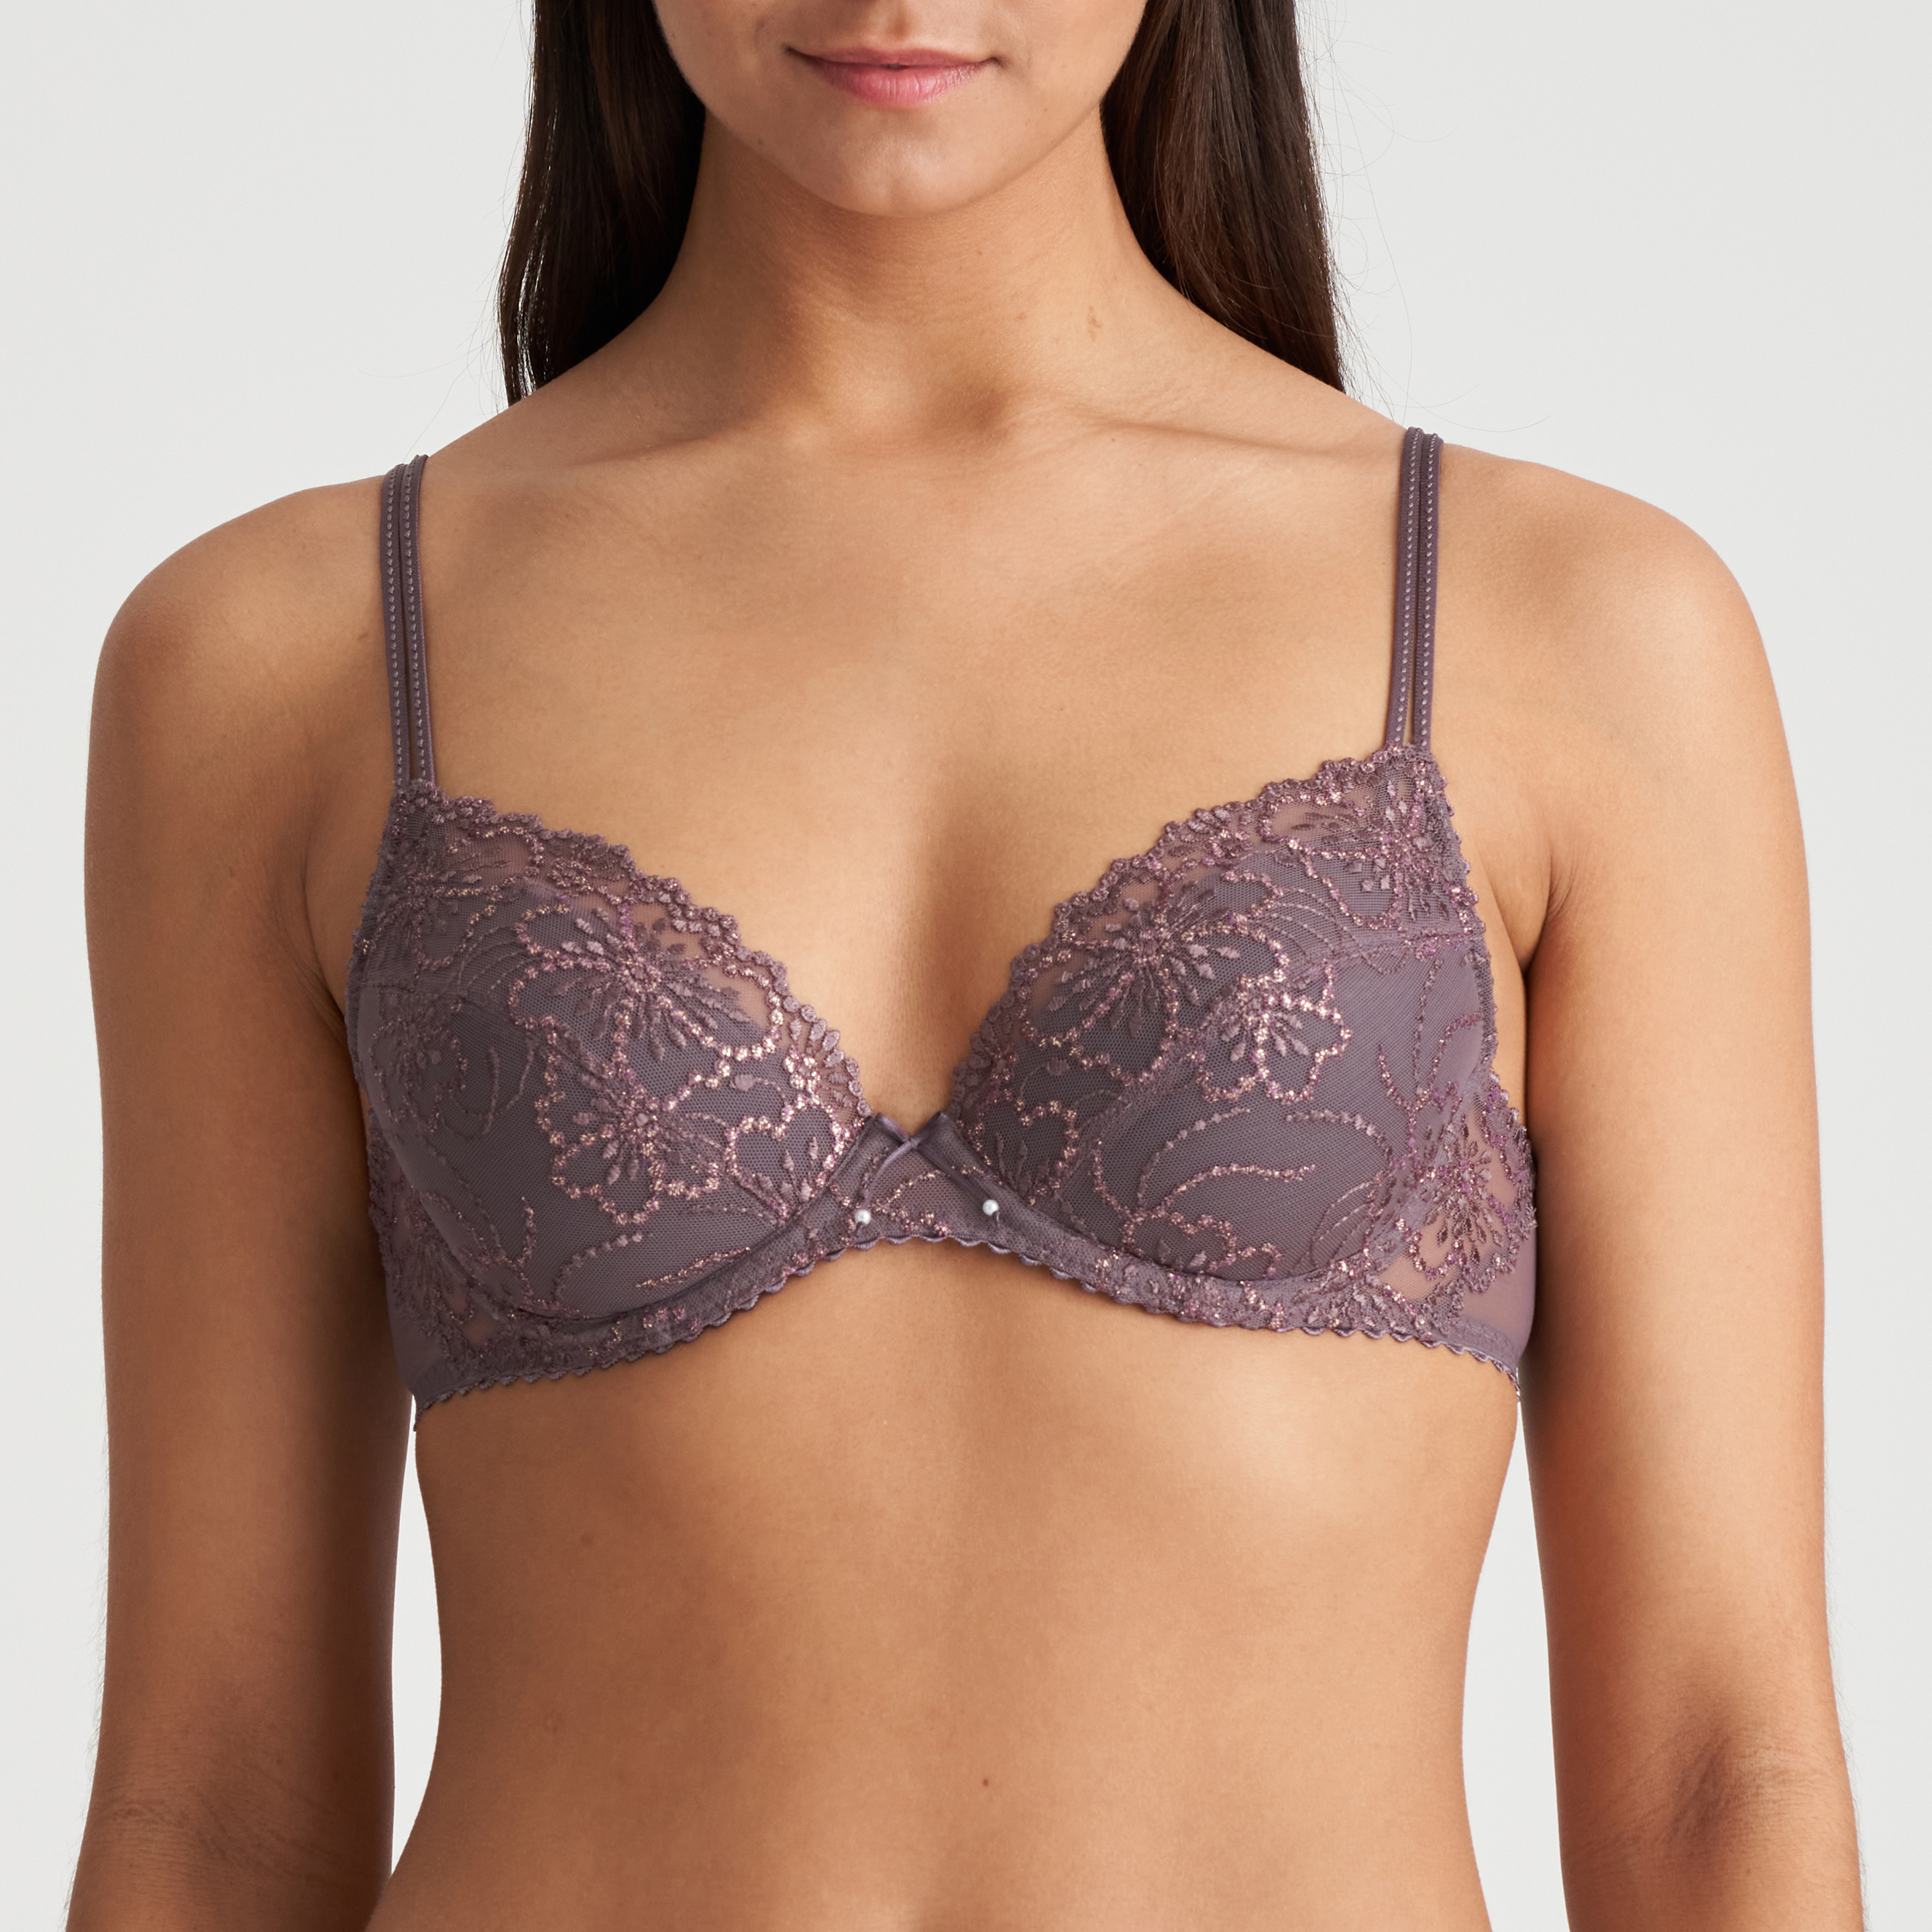 Marie Jo JADEI natural push-up bra removable pads